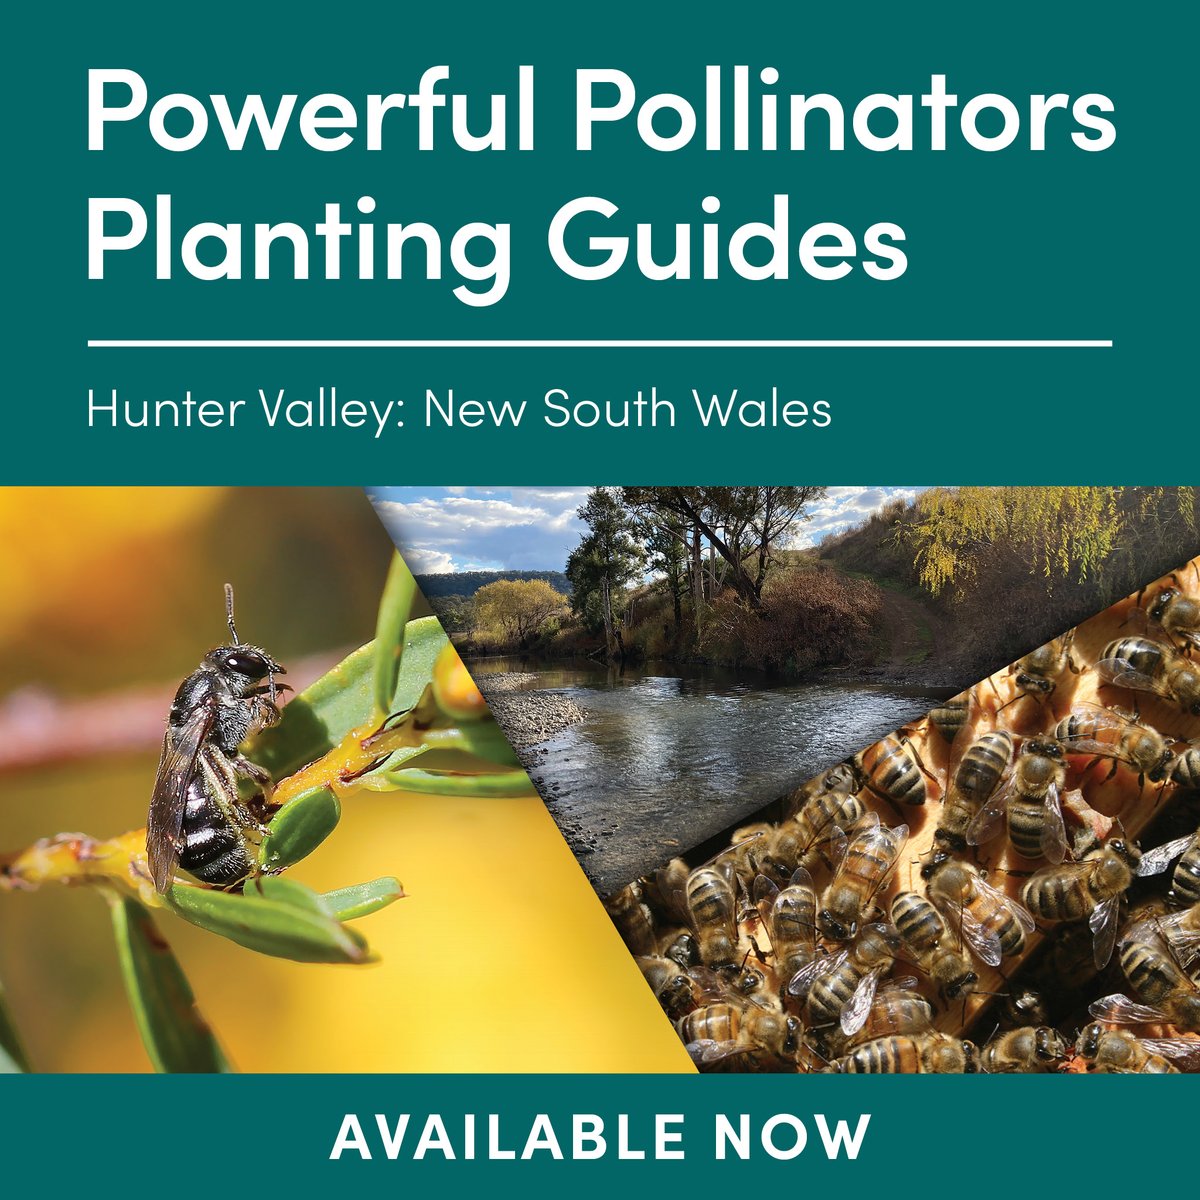 A Powerful Pollinators Planting Guide is now available for residents of the Hunter Valley region. The guide contains a list of plants indigenous to the region to help gardeners select plants that provide food for pollinators. Download the guide at bit.ly/3WRf8jN